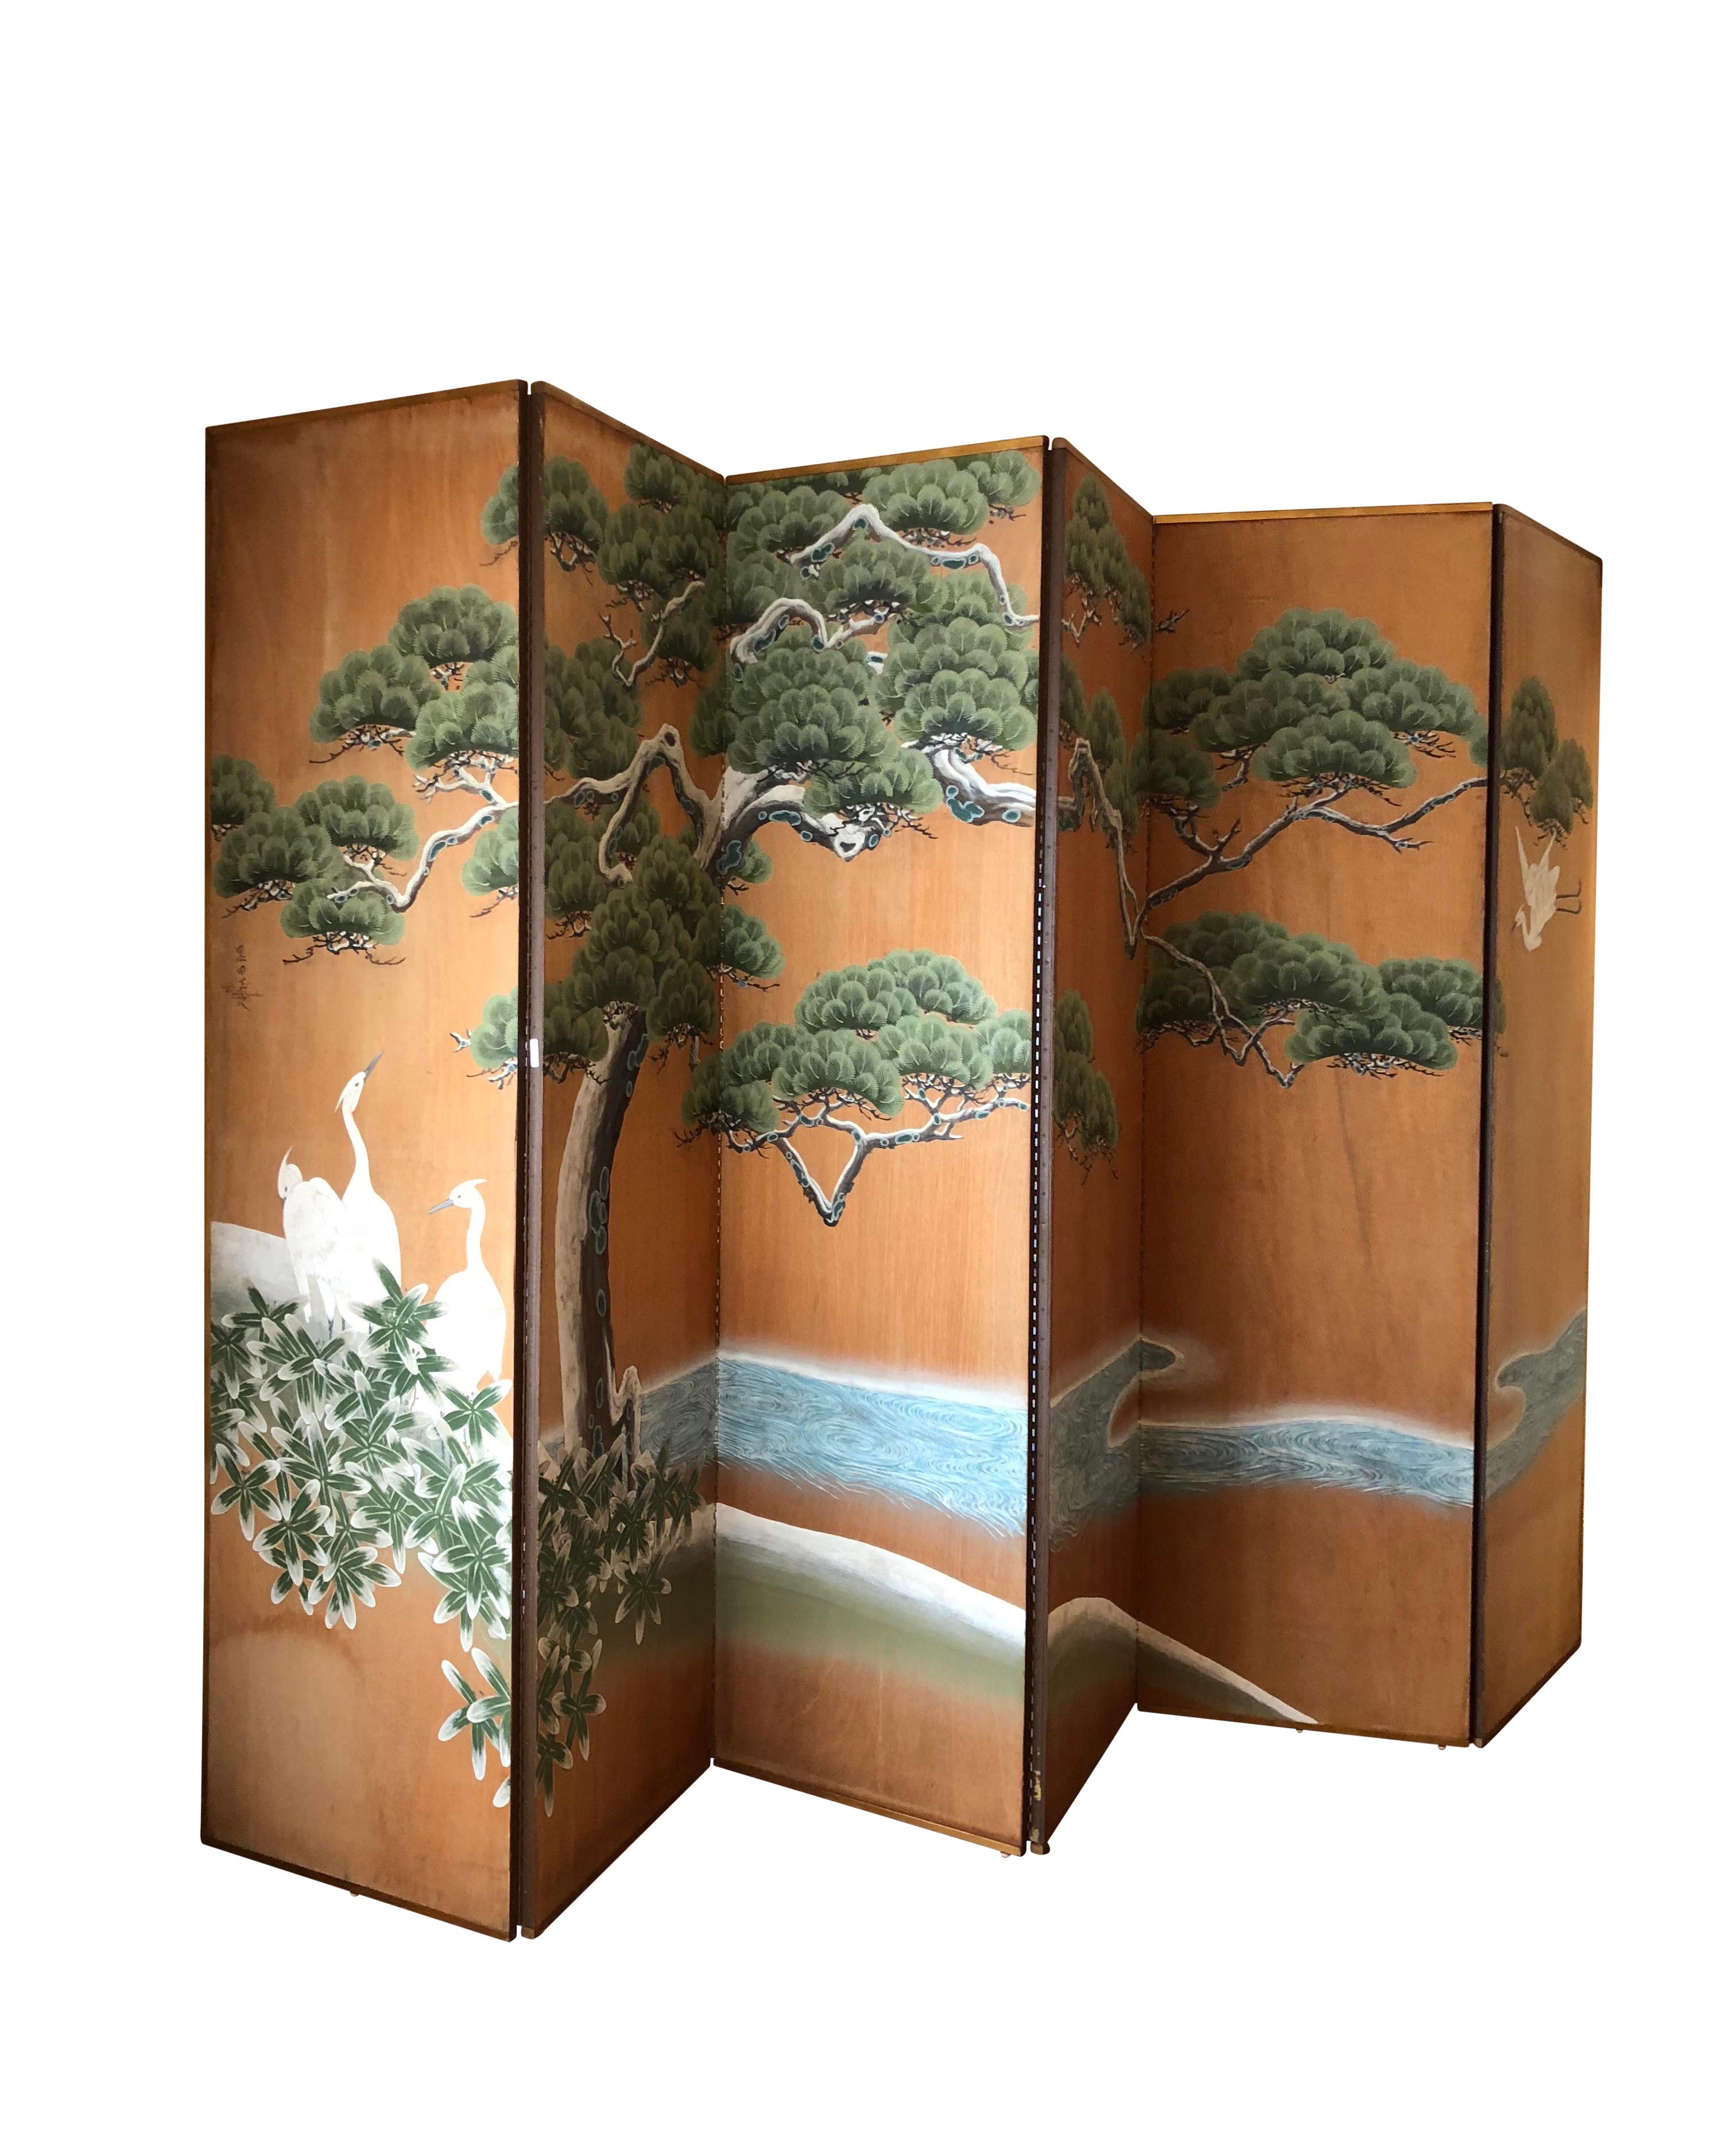 Hand-Painted Japanese Inspired Screen by Artist Robert Crowder In Good Condition For Sale In San Francisco, CA